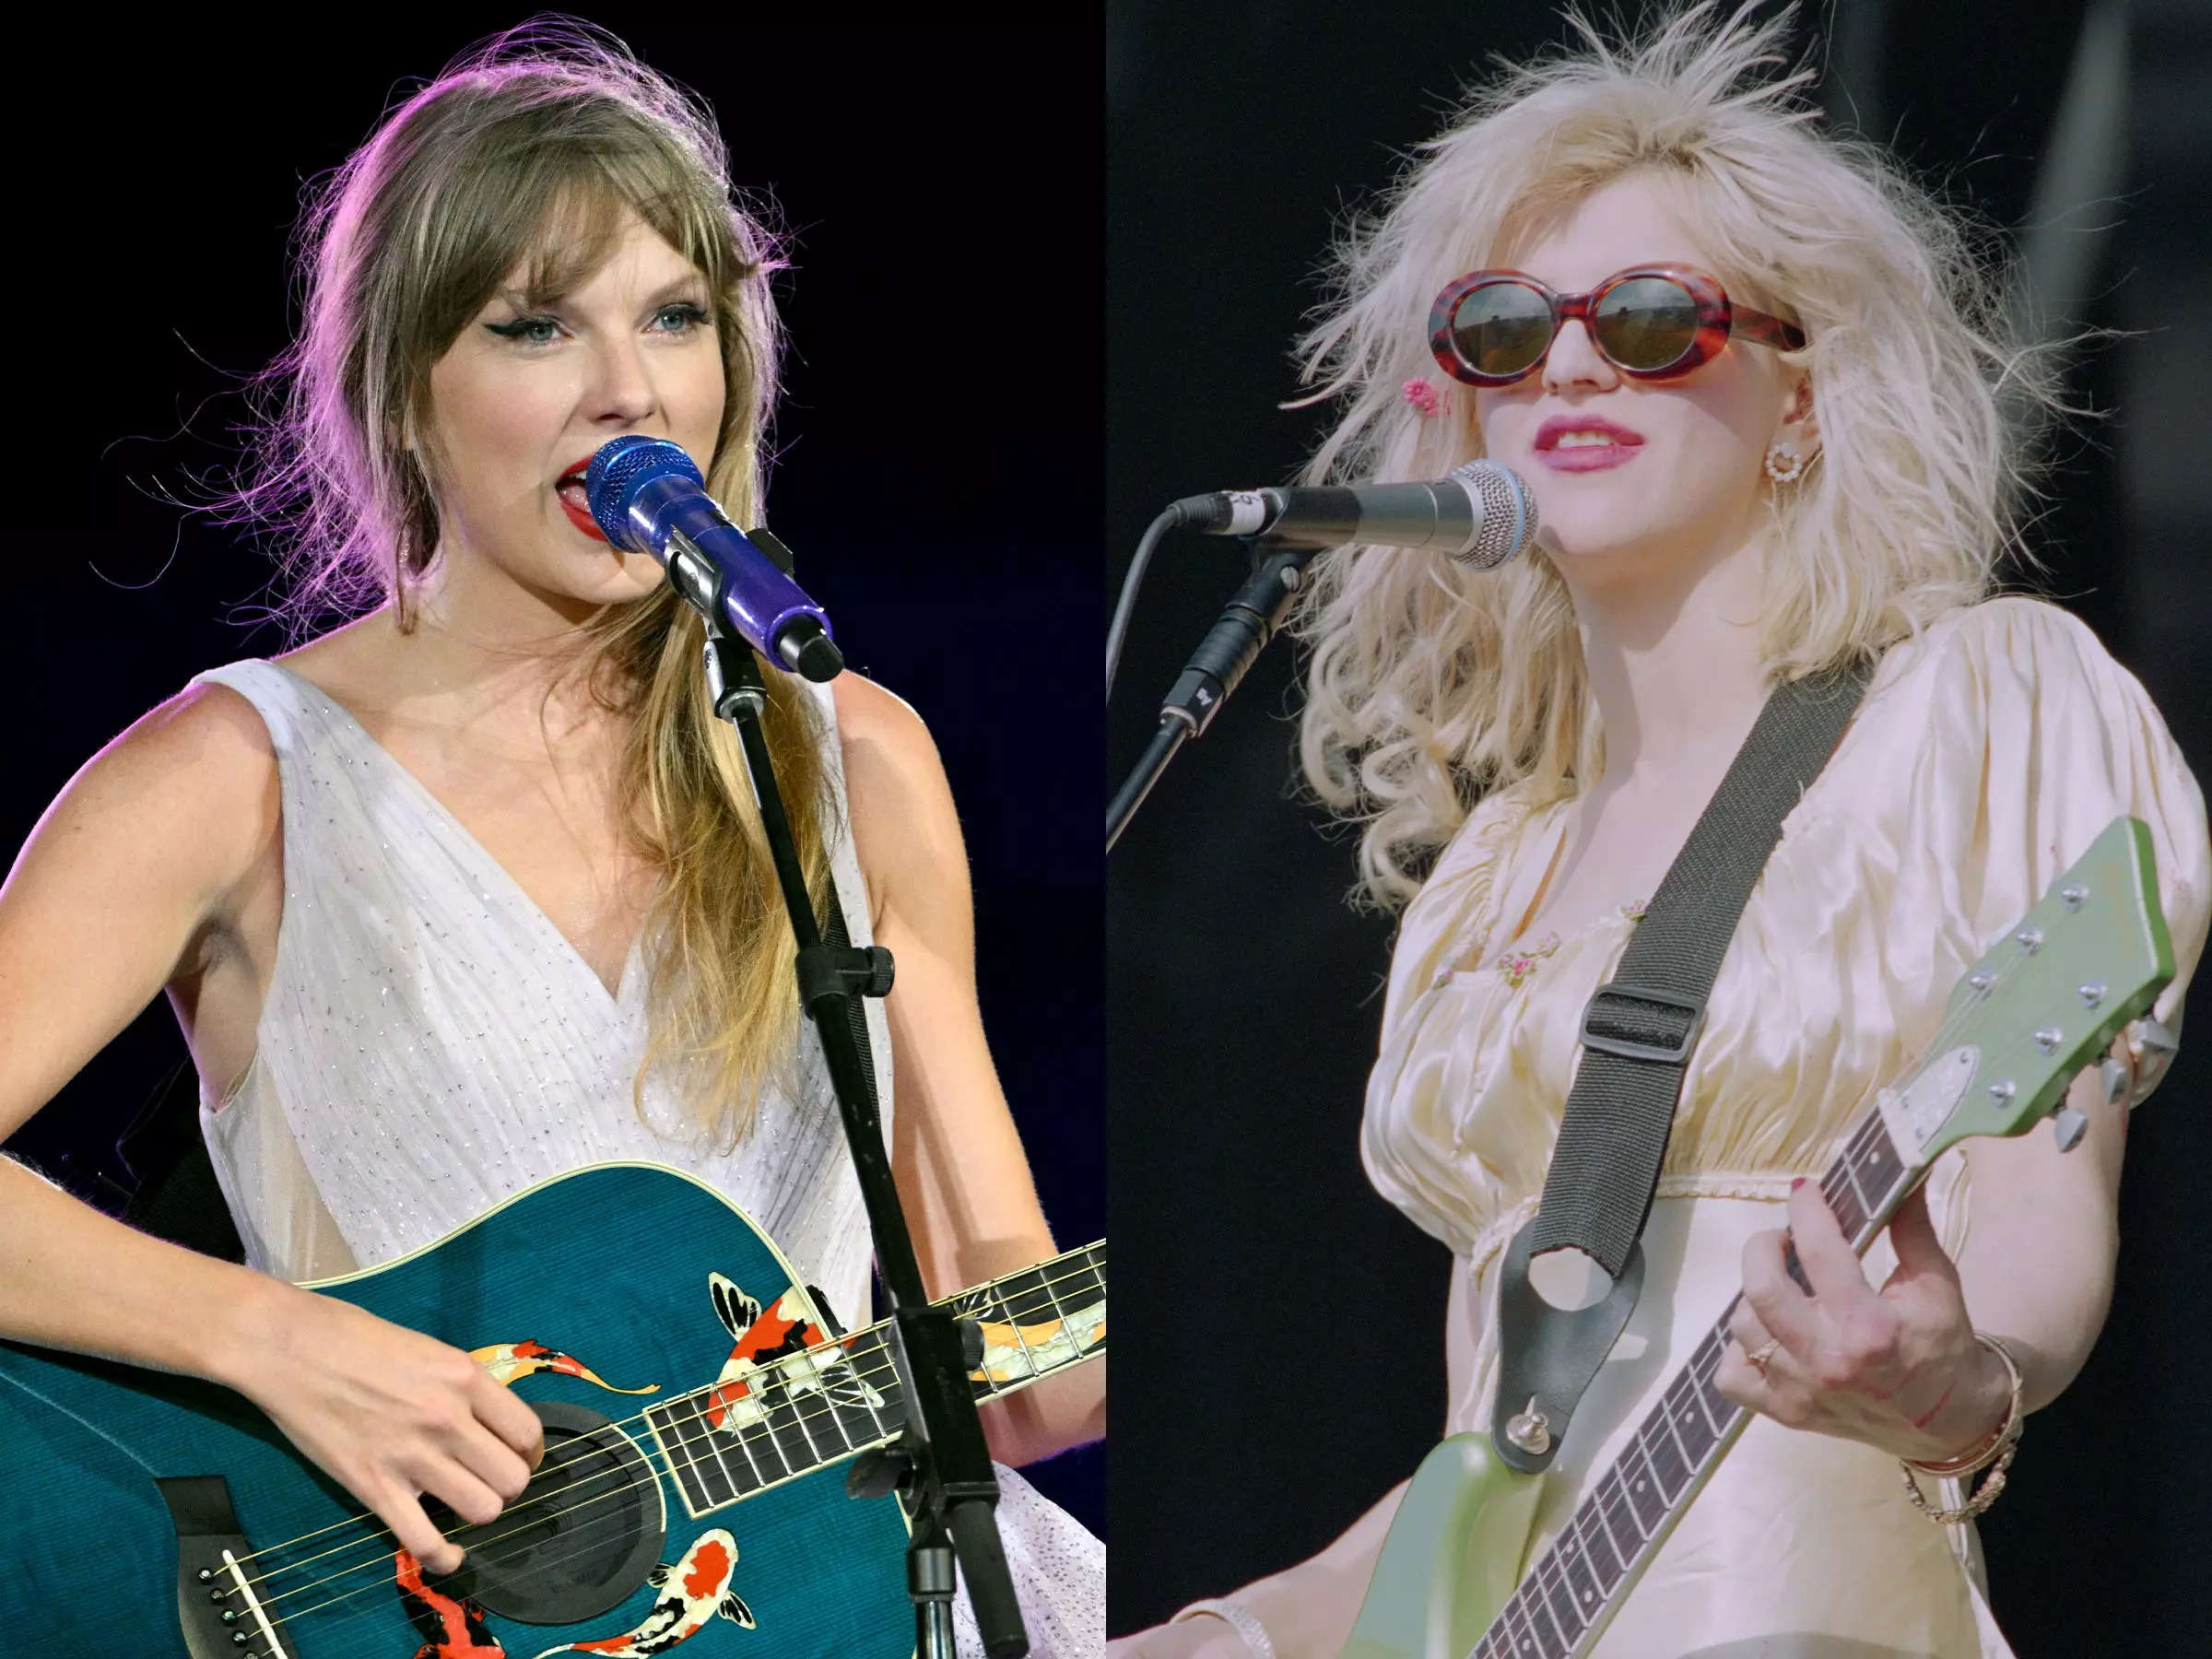 Courtney Love says Taylor Swift is 'not important' and 'not interesting as an artist' | Business Insider India